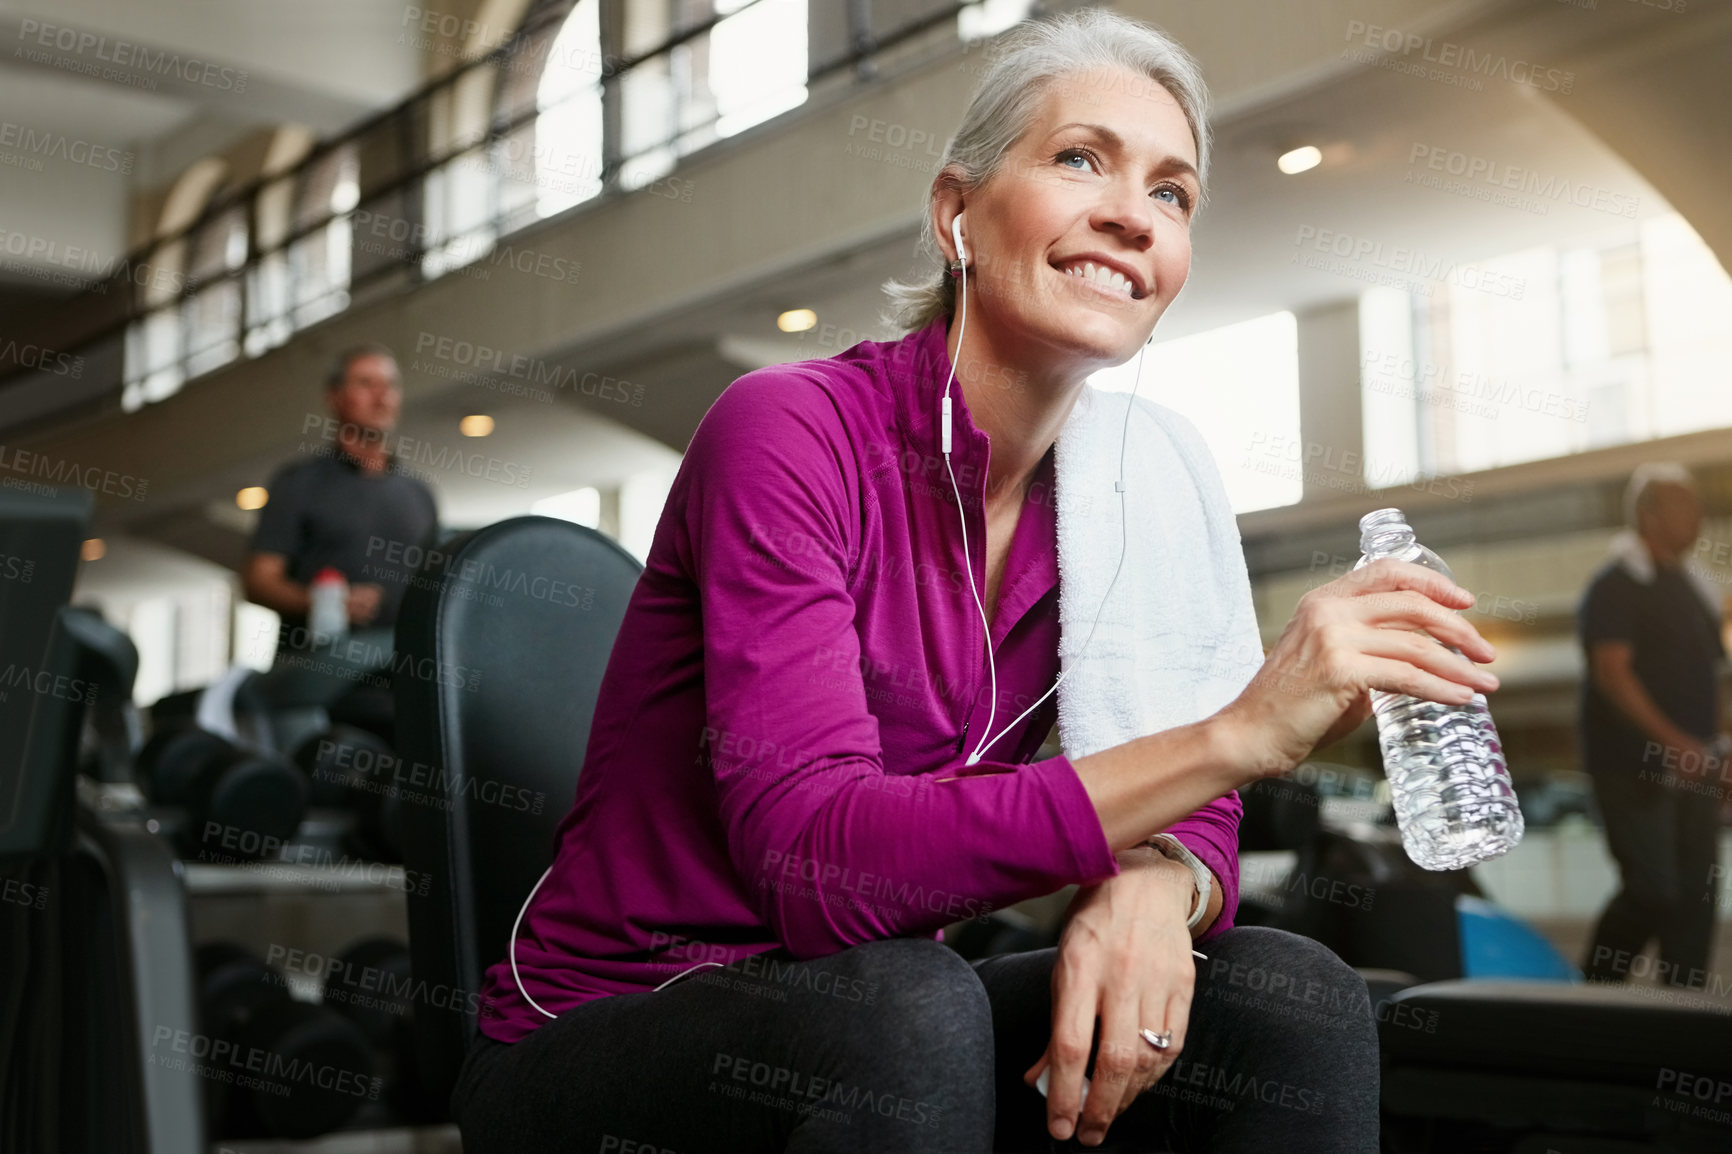 Buy stock photo Portrait of a happy senior woman holding a water bottle and taking a break from her workout at the gym